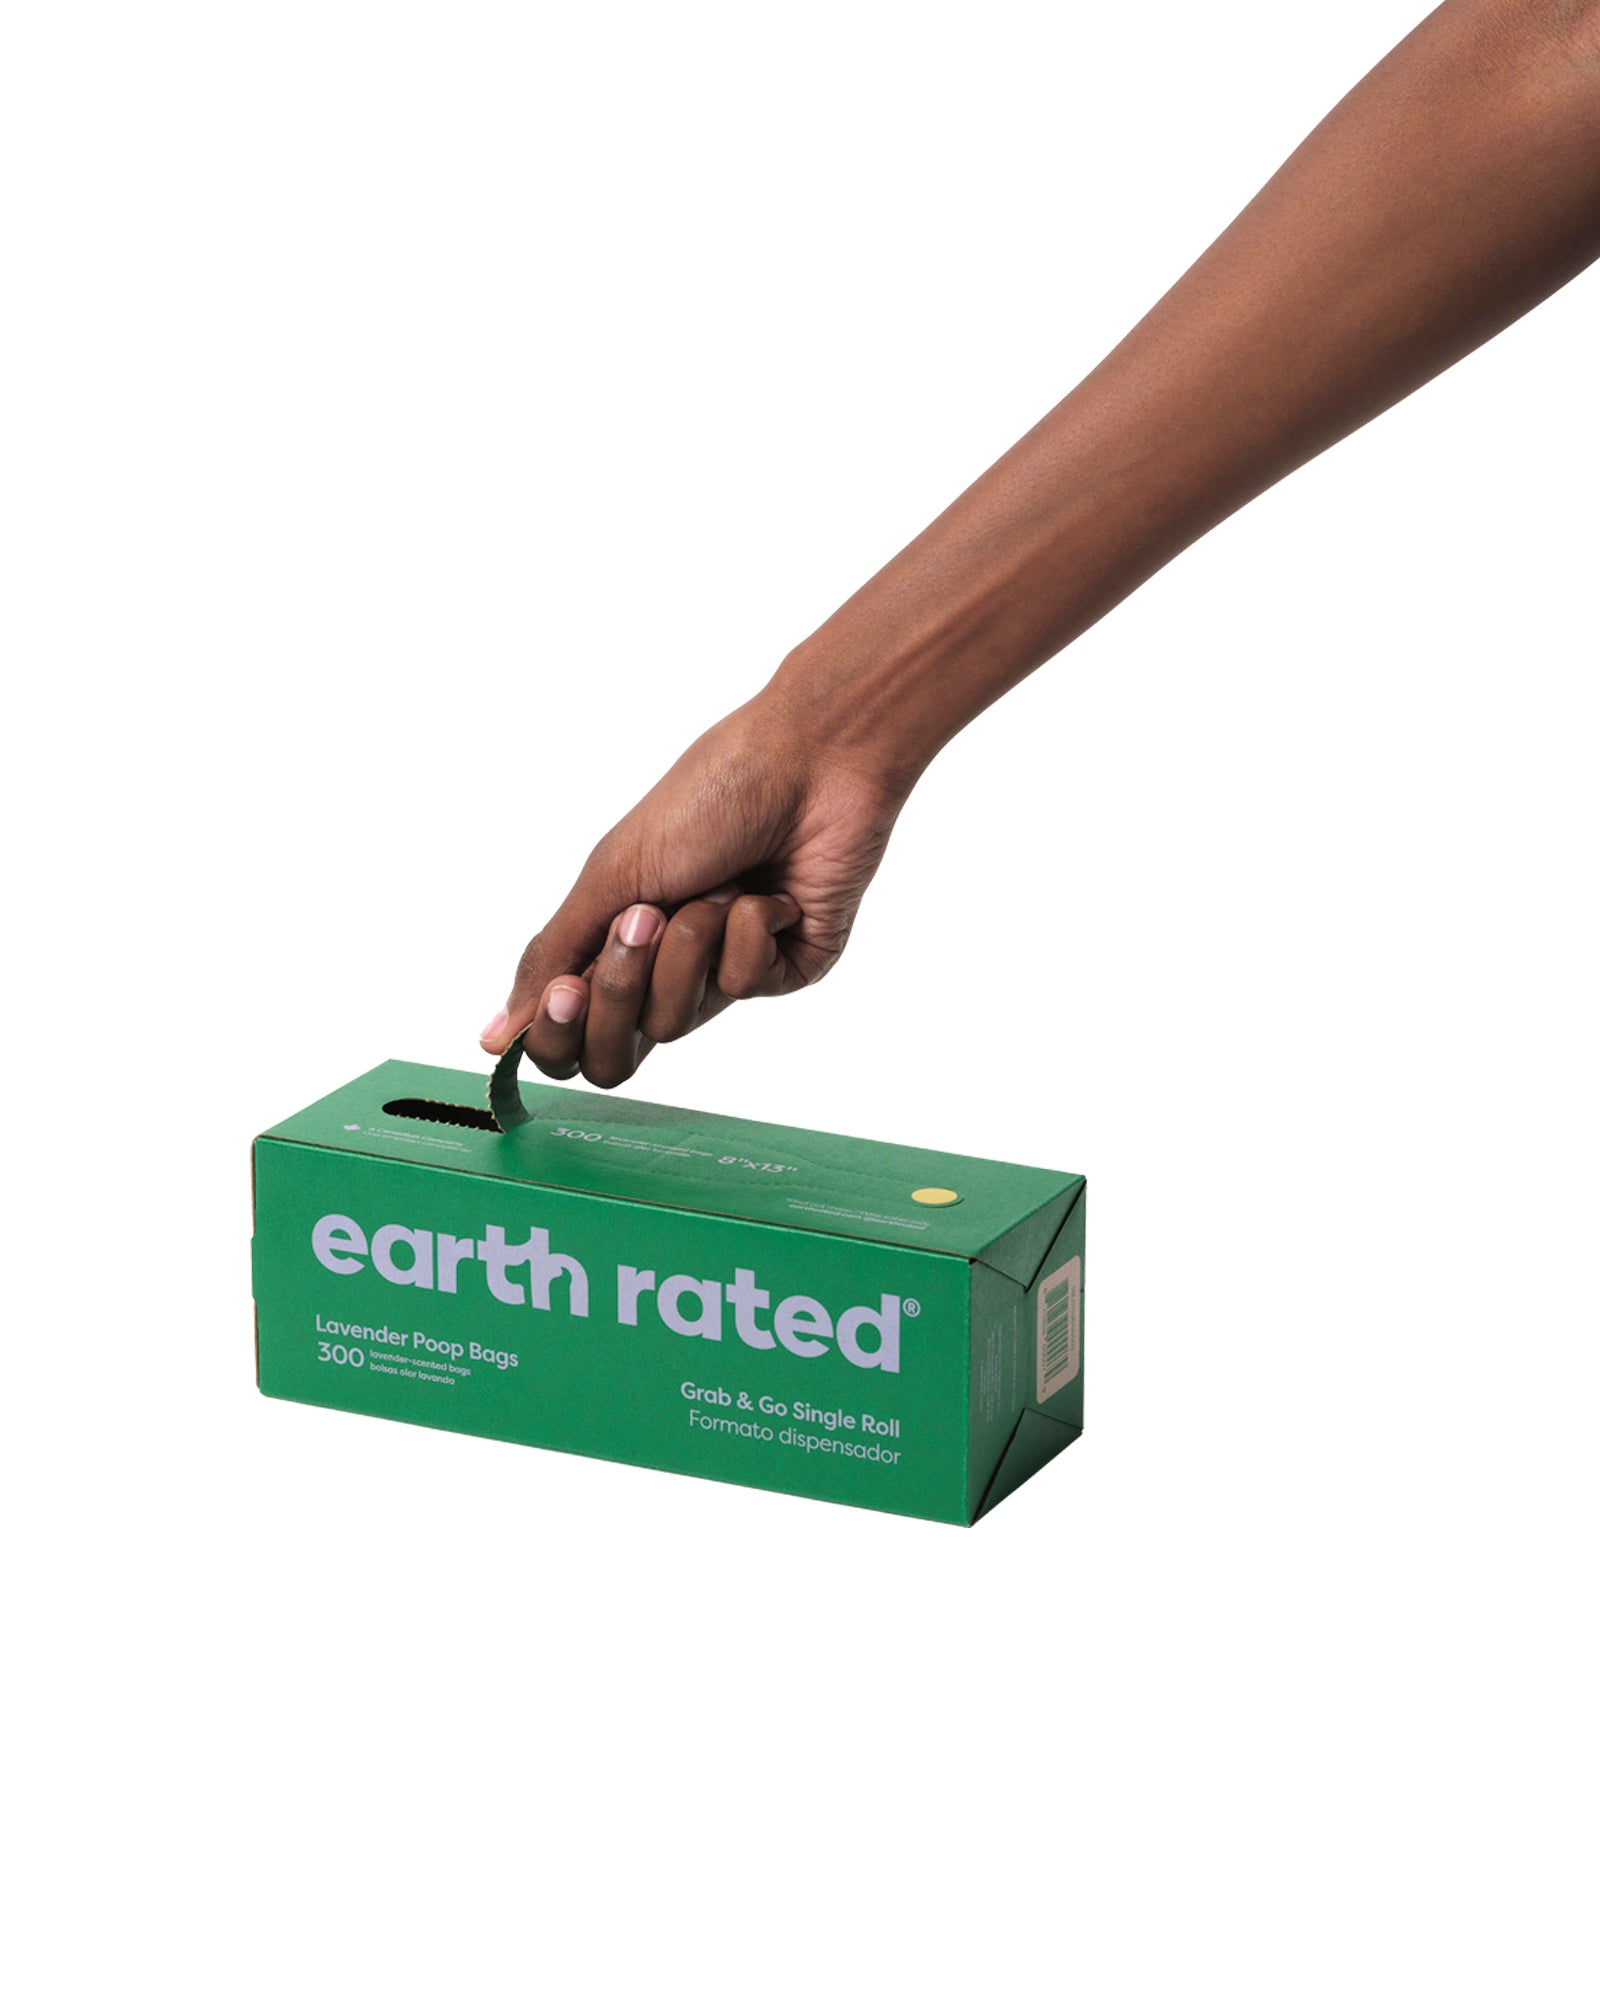 Earth Rated Unscented Single Roll Dog Poop Bags, Count of 300